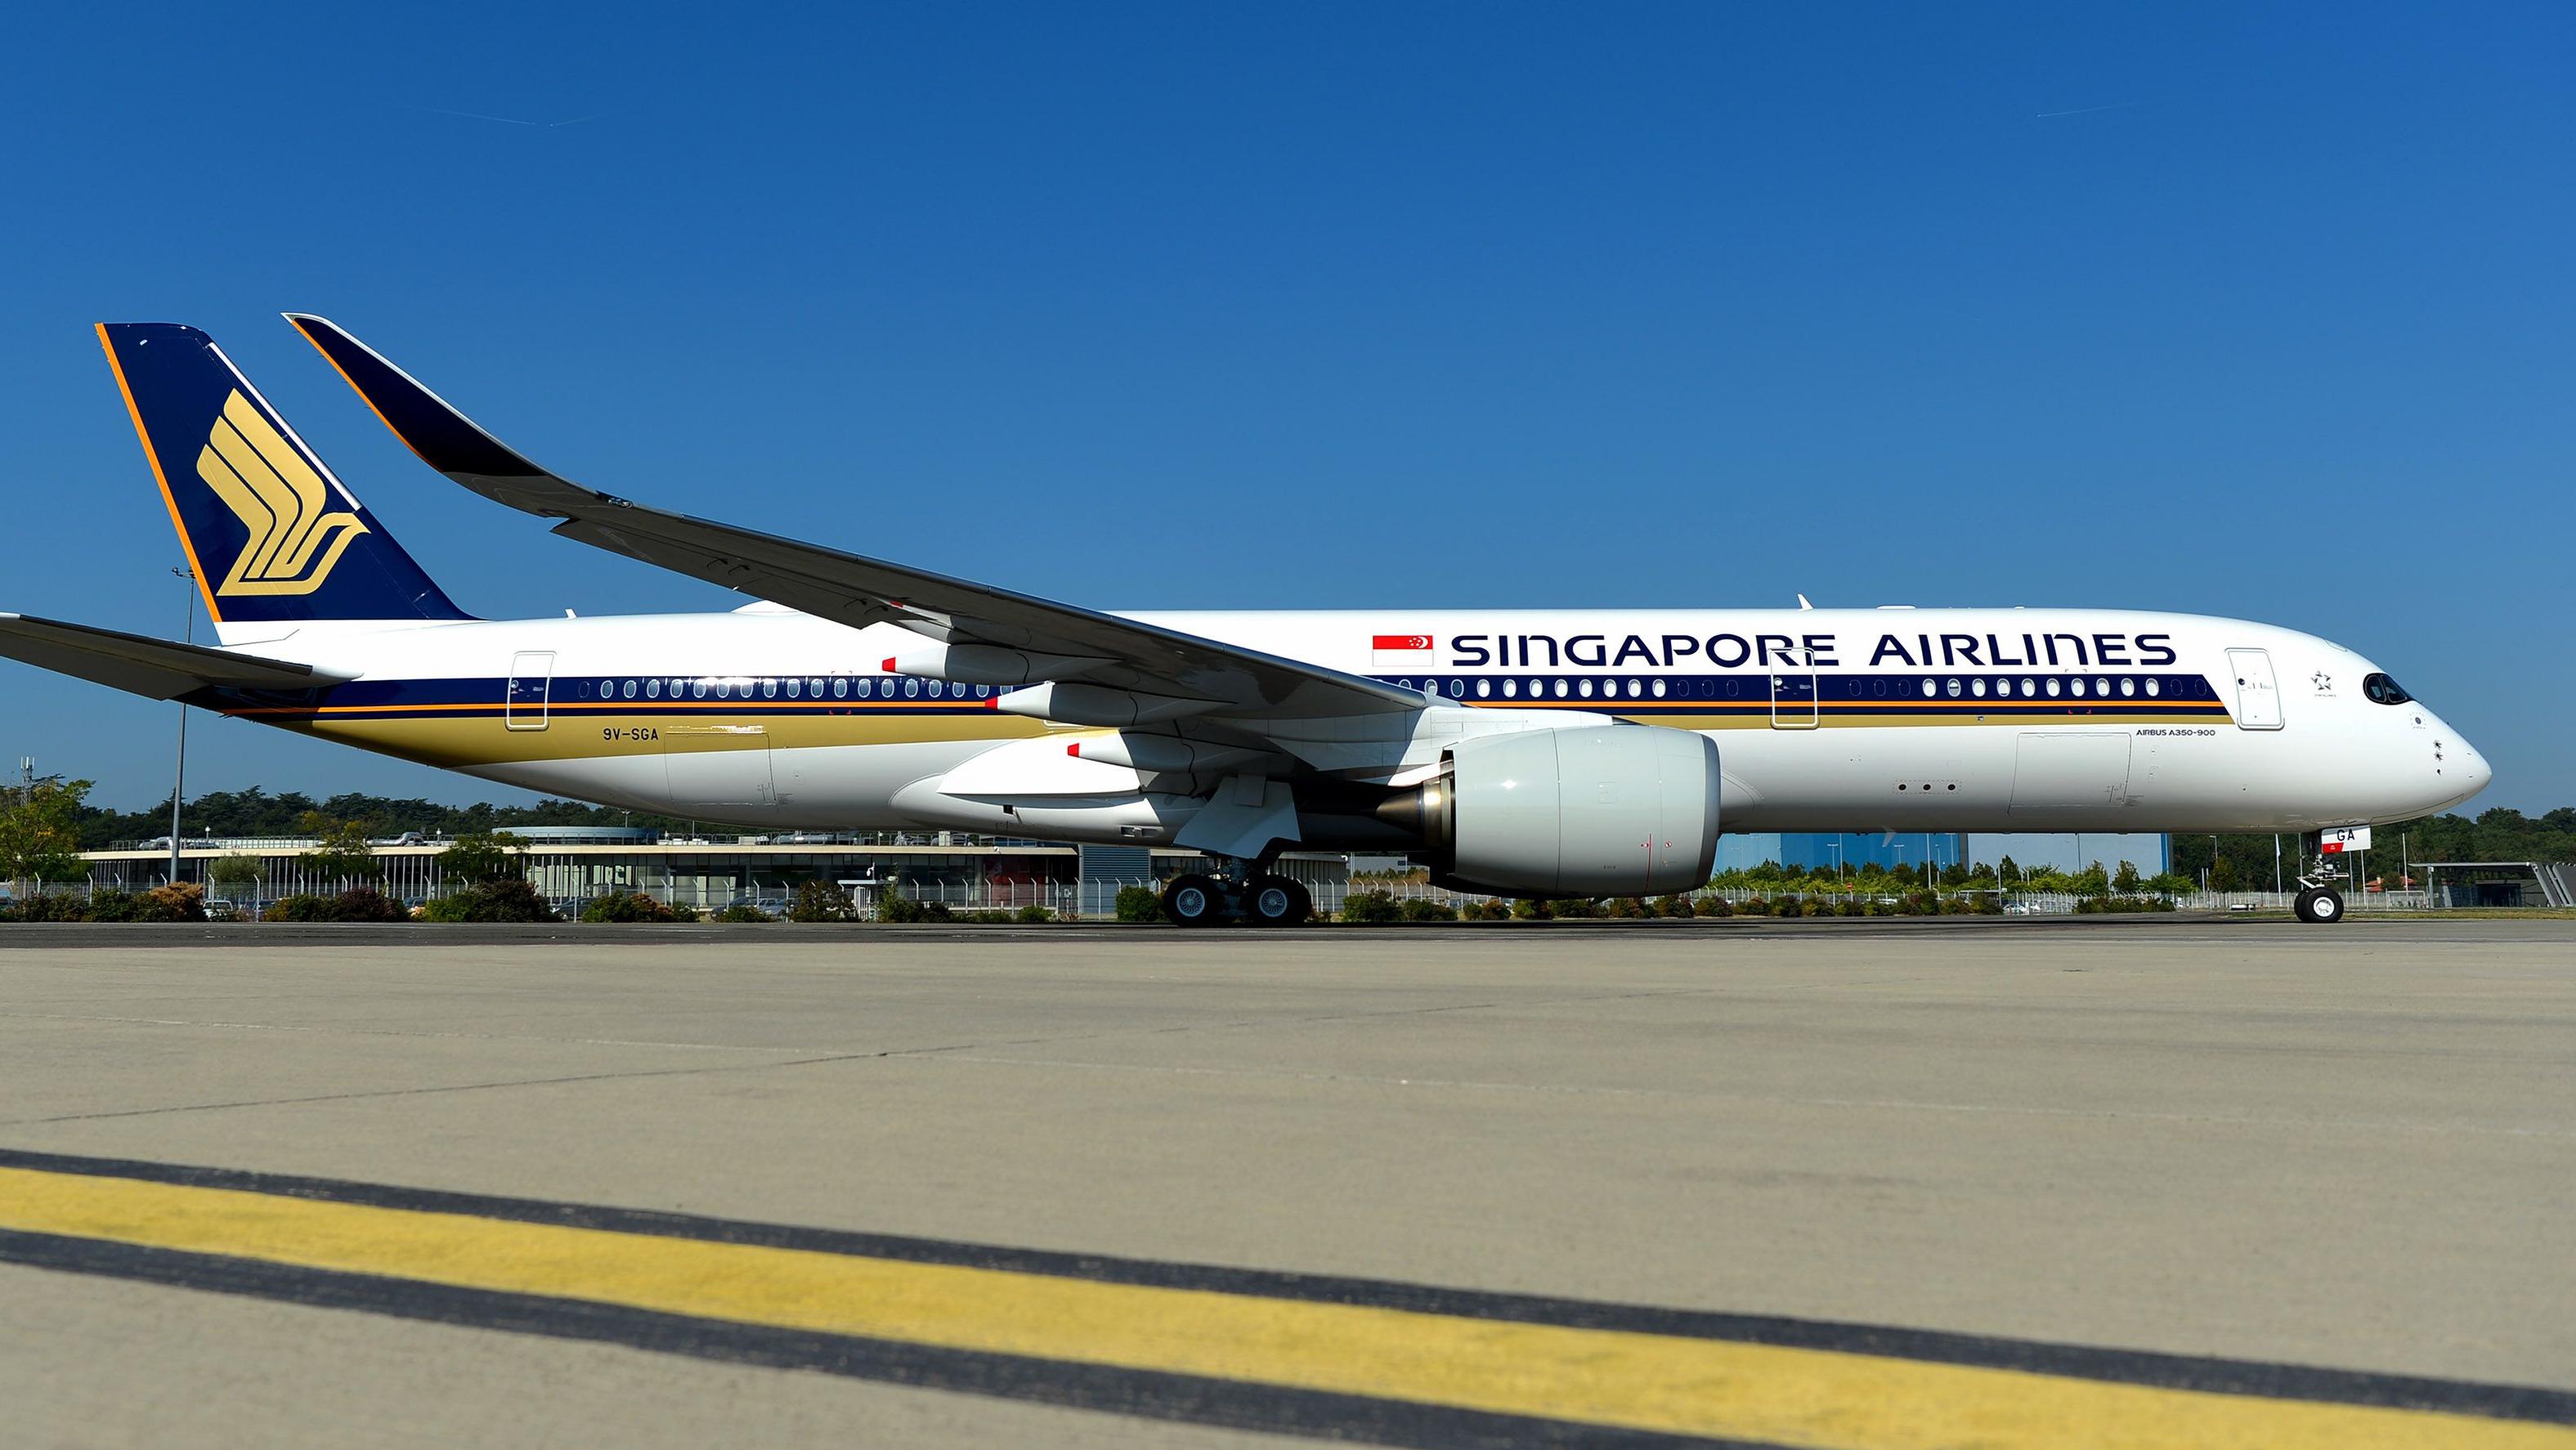 Singapore Airlines launches world’s longest non-stop commercial flight - SIA A350-900ULR.